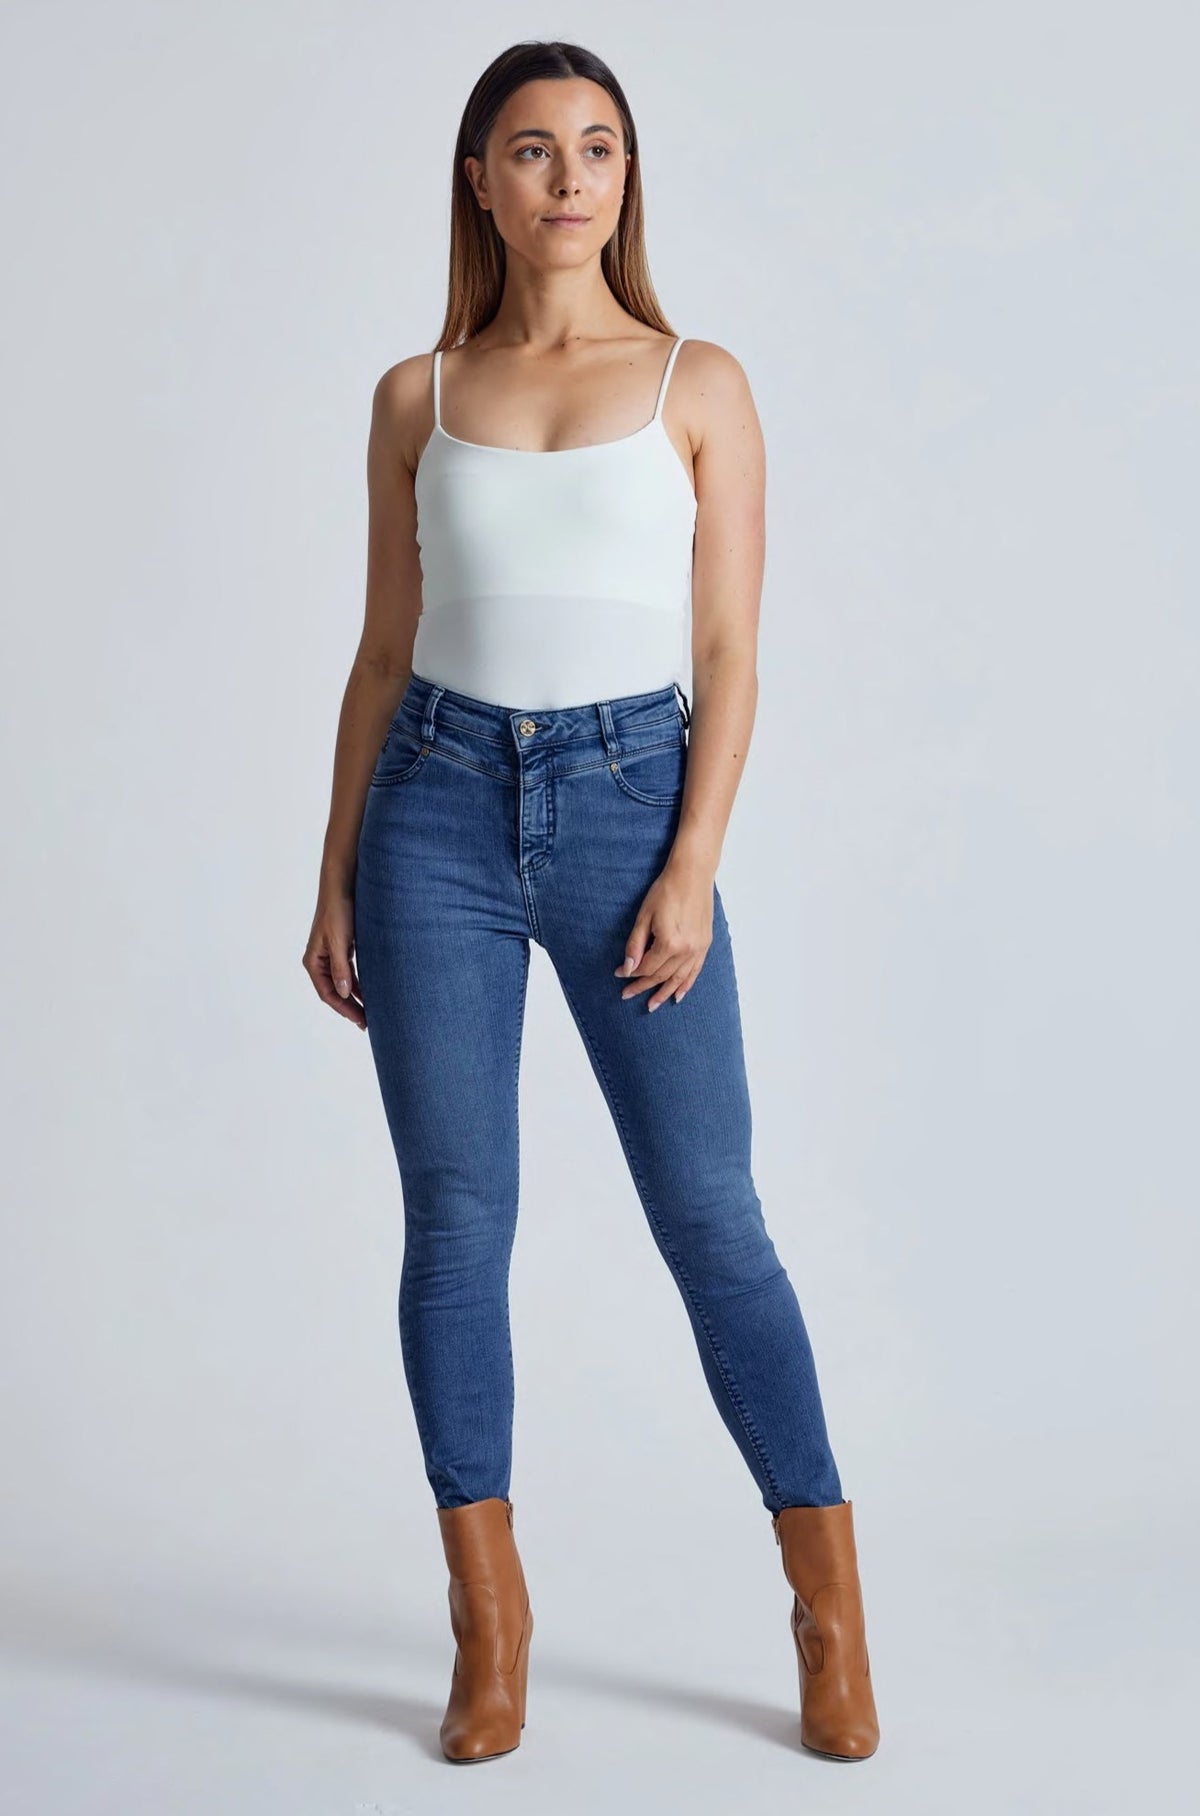 Azure Nina High Waisted Skinny Jeans - GOTS Certified Organic Cotton and Recycled Polyester